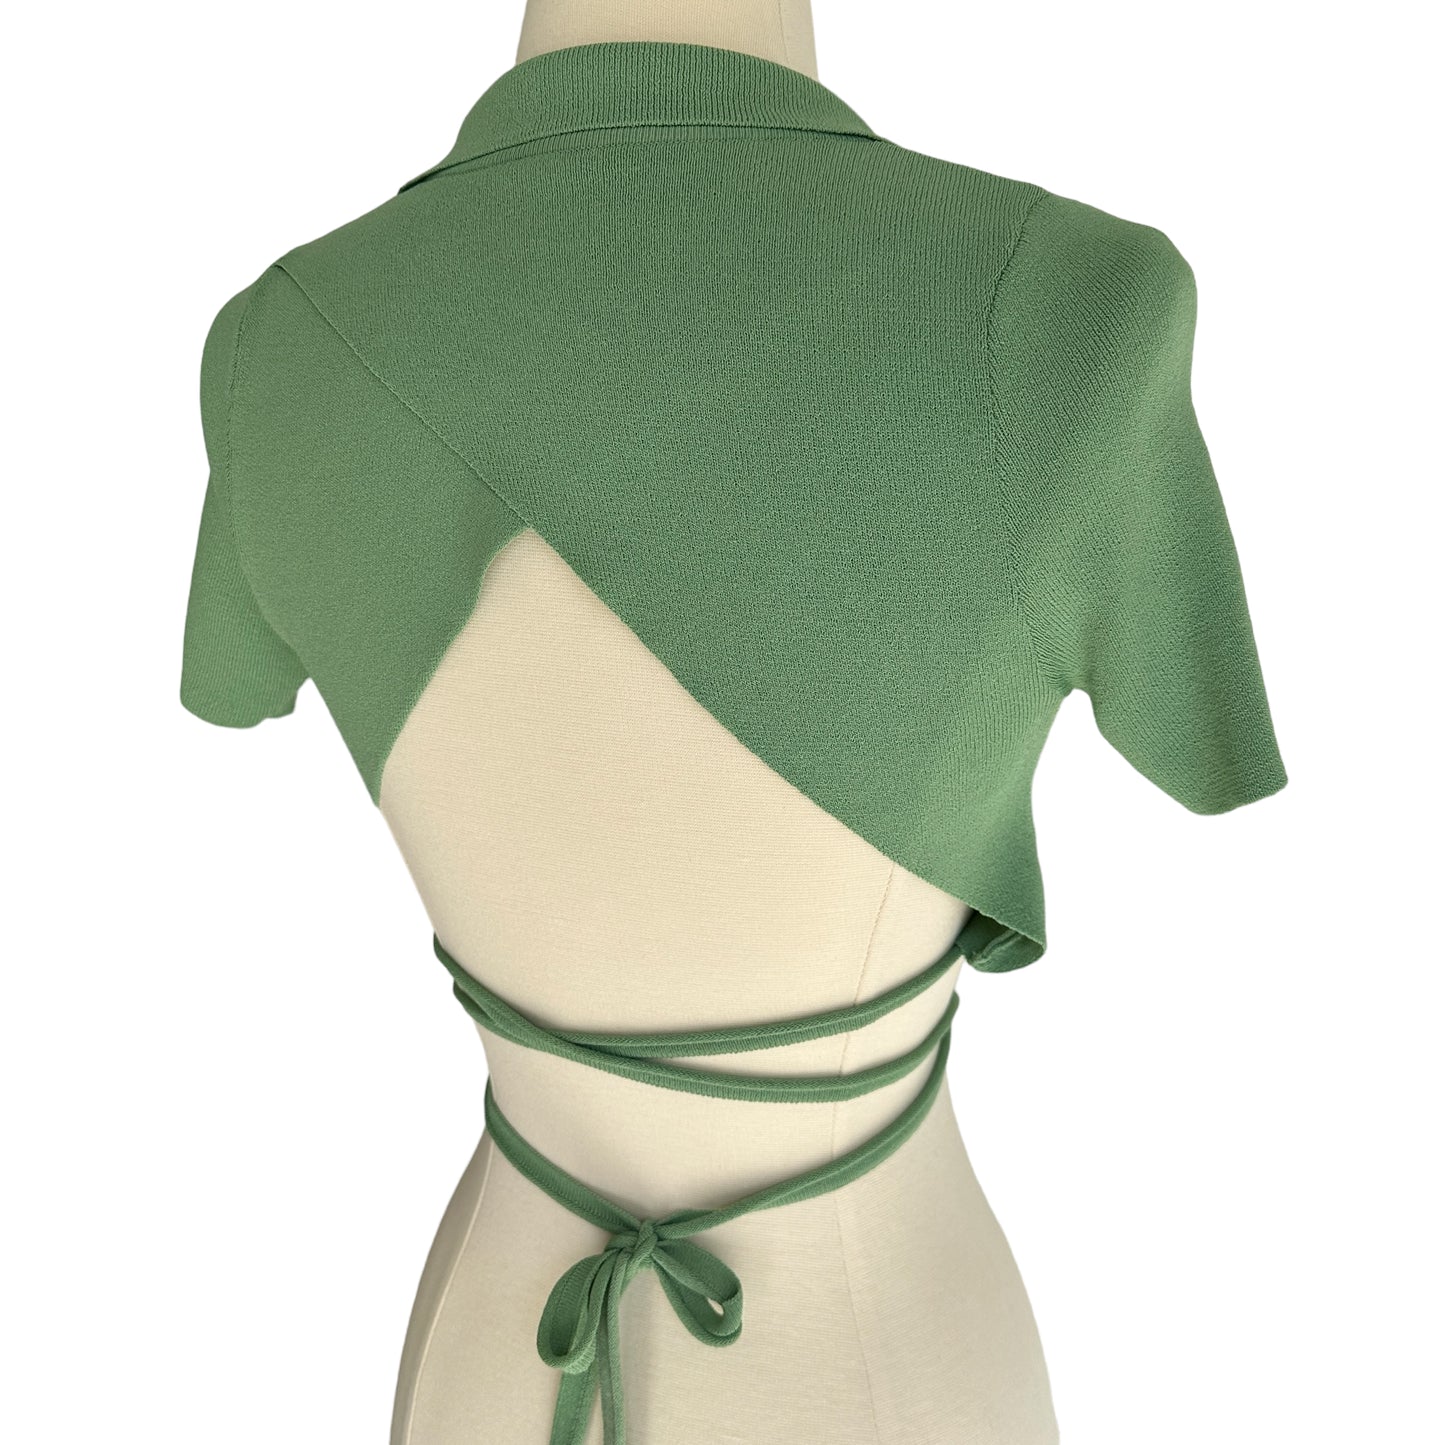 Green Cropped Top - XS